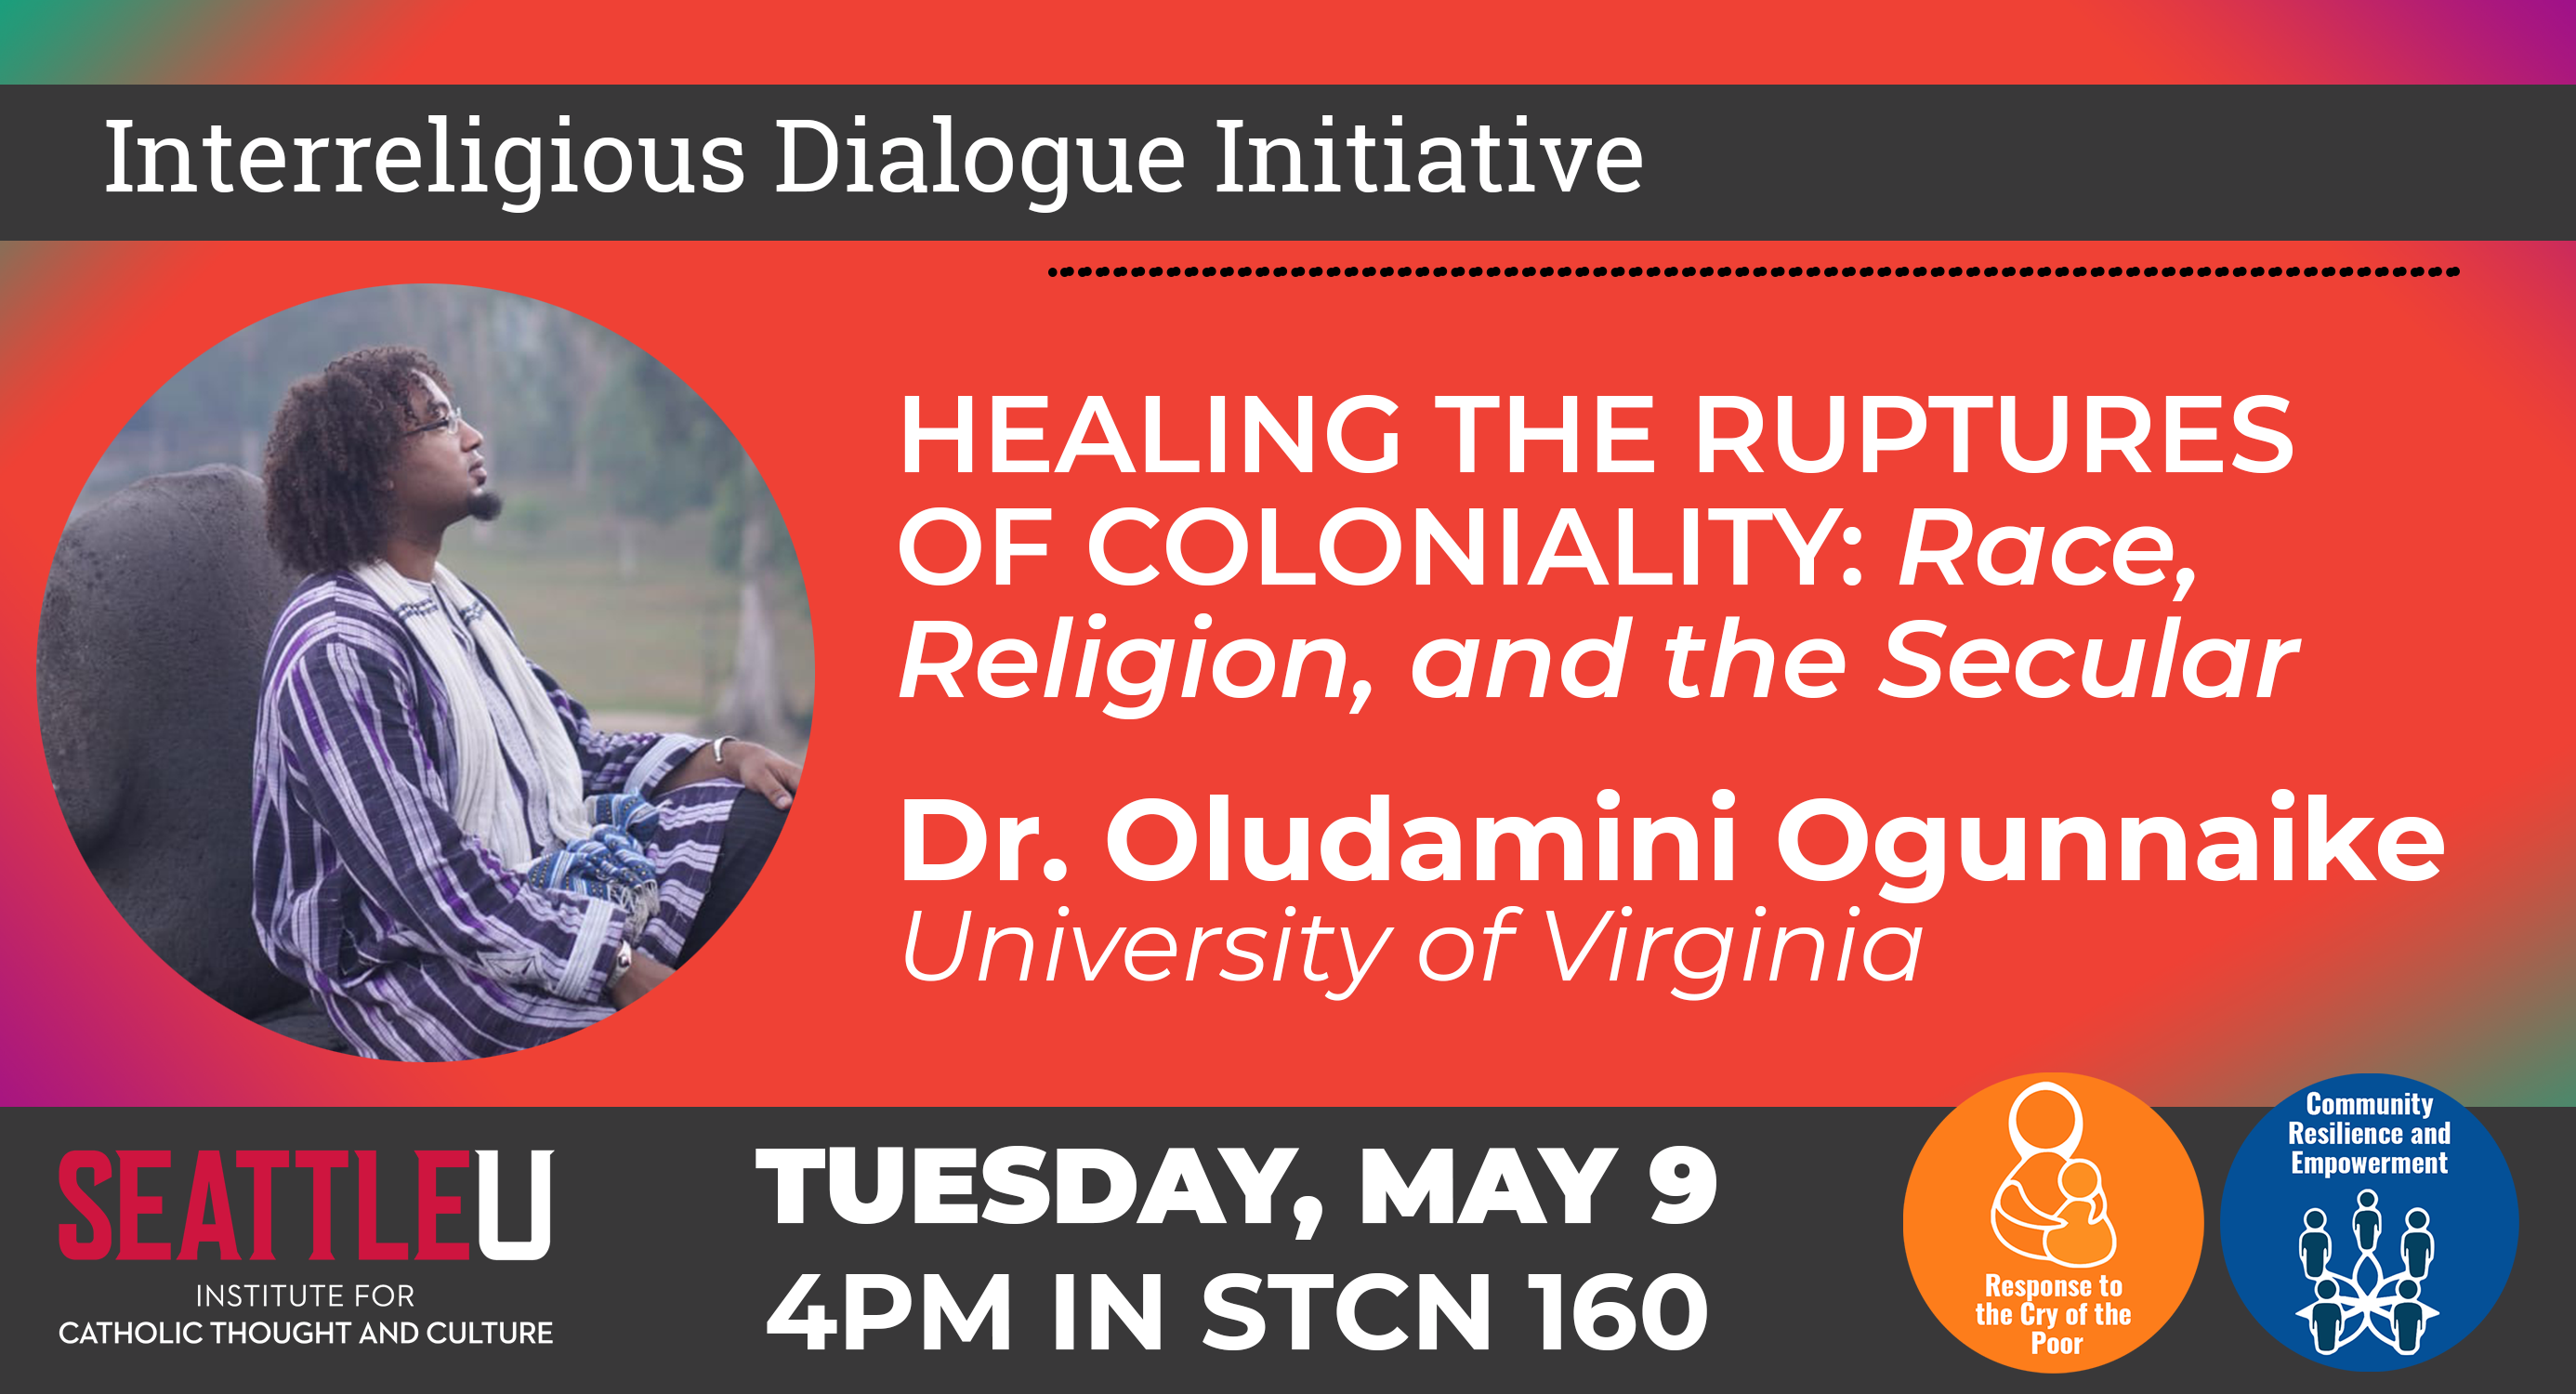 Flyer of event. Background color orange red. On the right of the flyer, there is a photography of Dr. Oludamini Ogunnaike. On the right side of the flyer, there is information about the event. The same information is displayed on the text below.